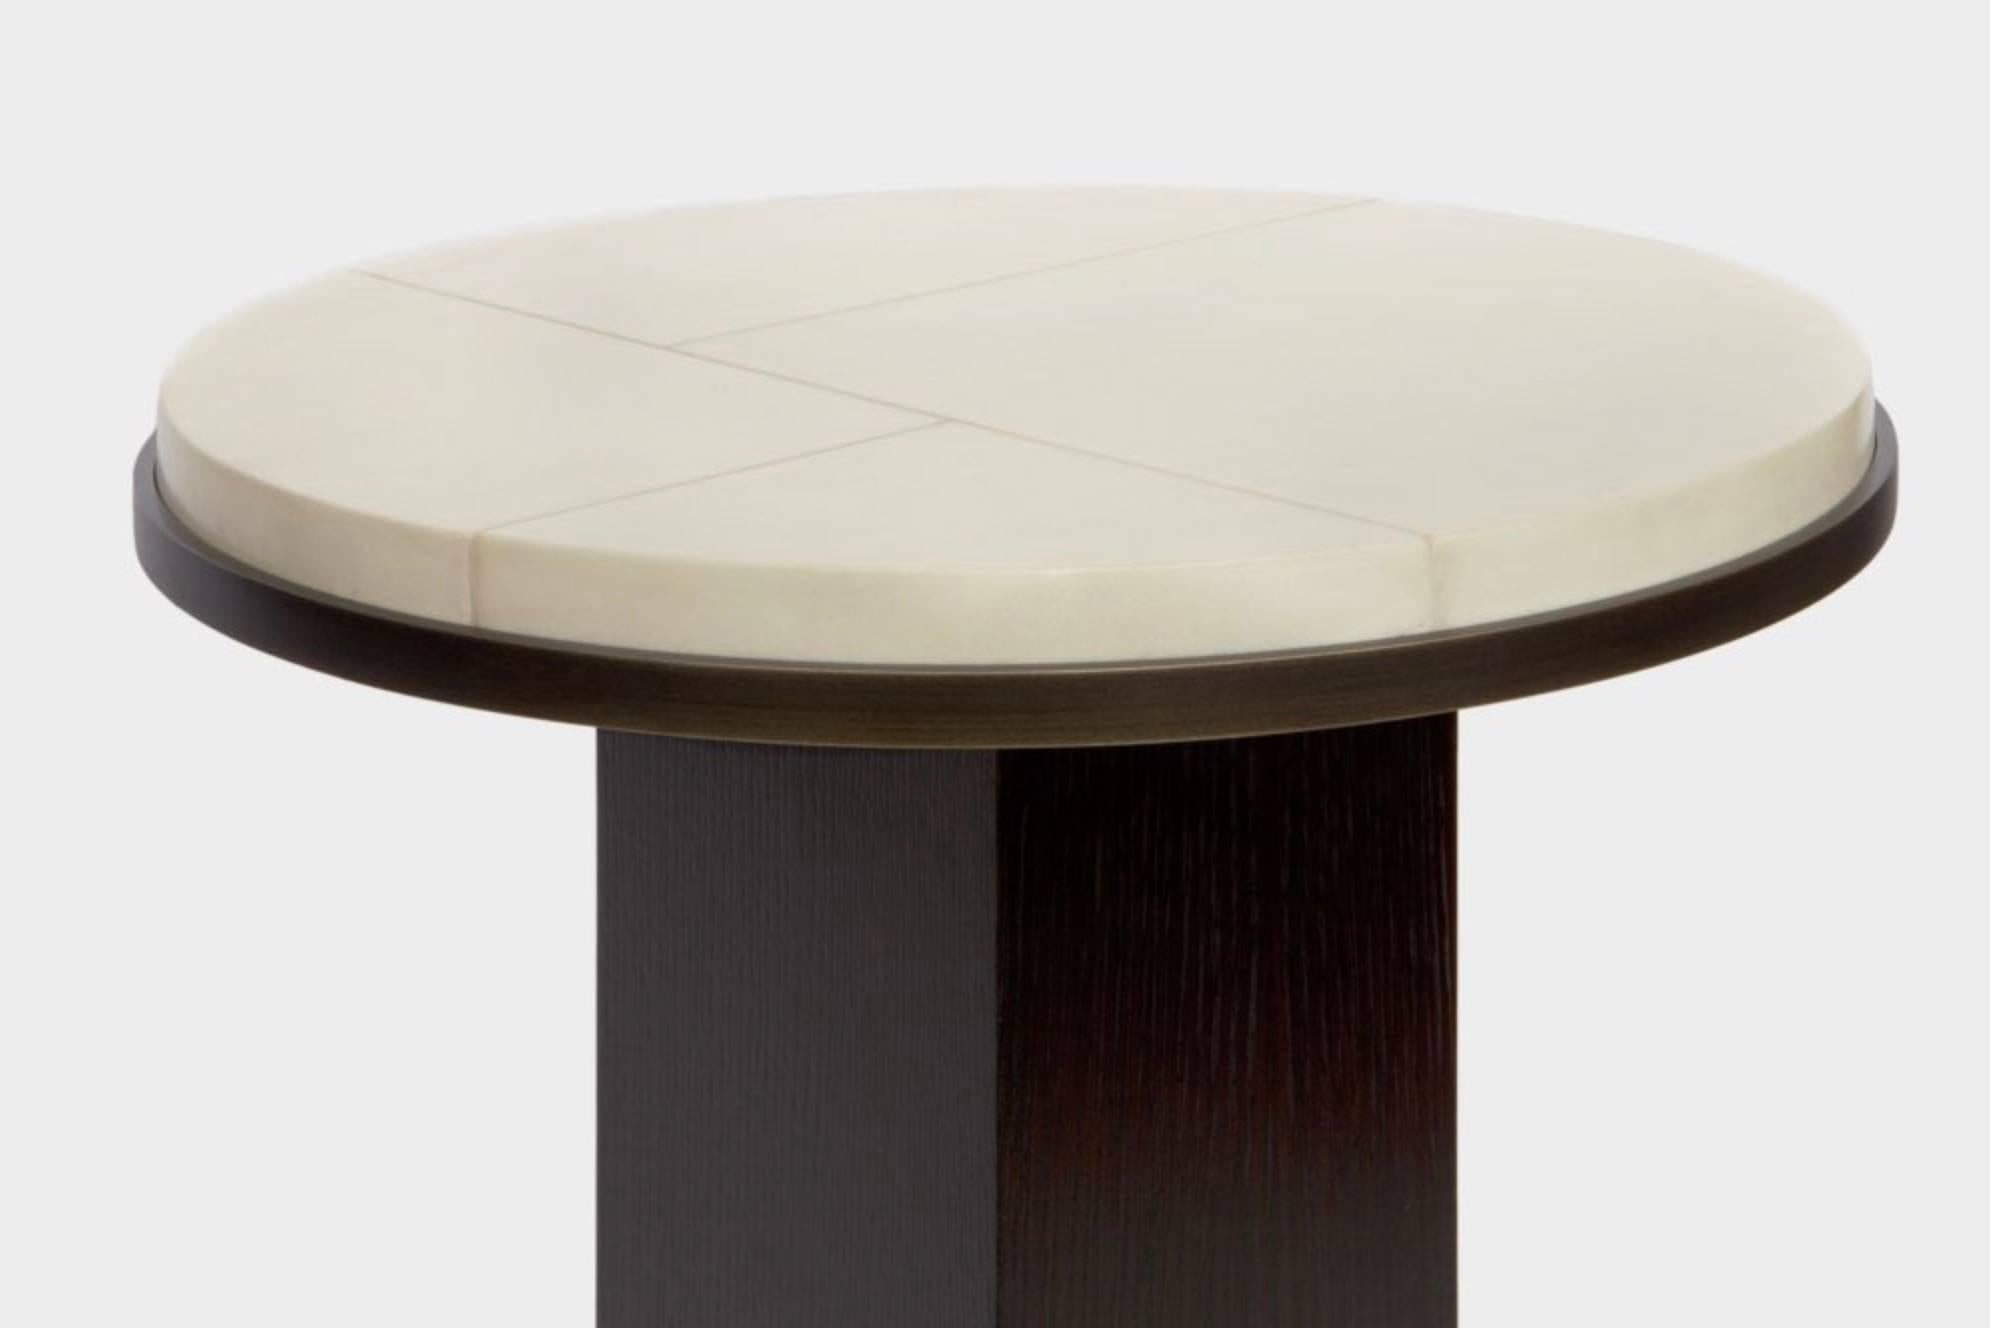 Minimalist Sculptural Parchment and Oak Table with a Detailed Brass Ring by Aguirre Design For Sale